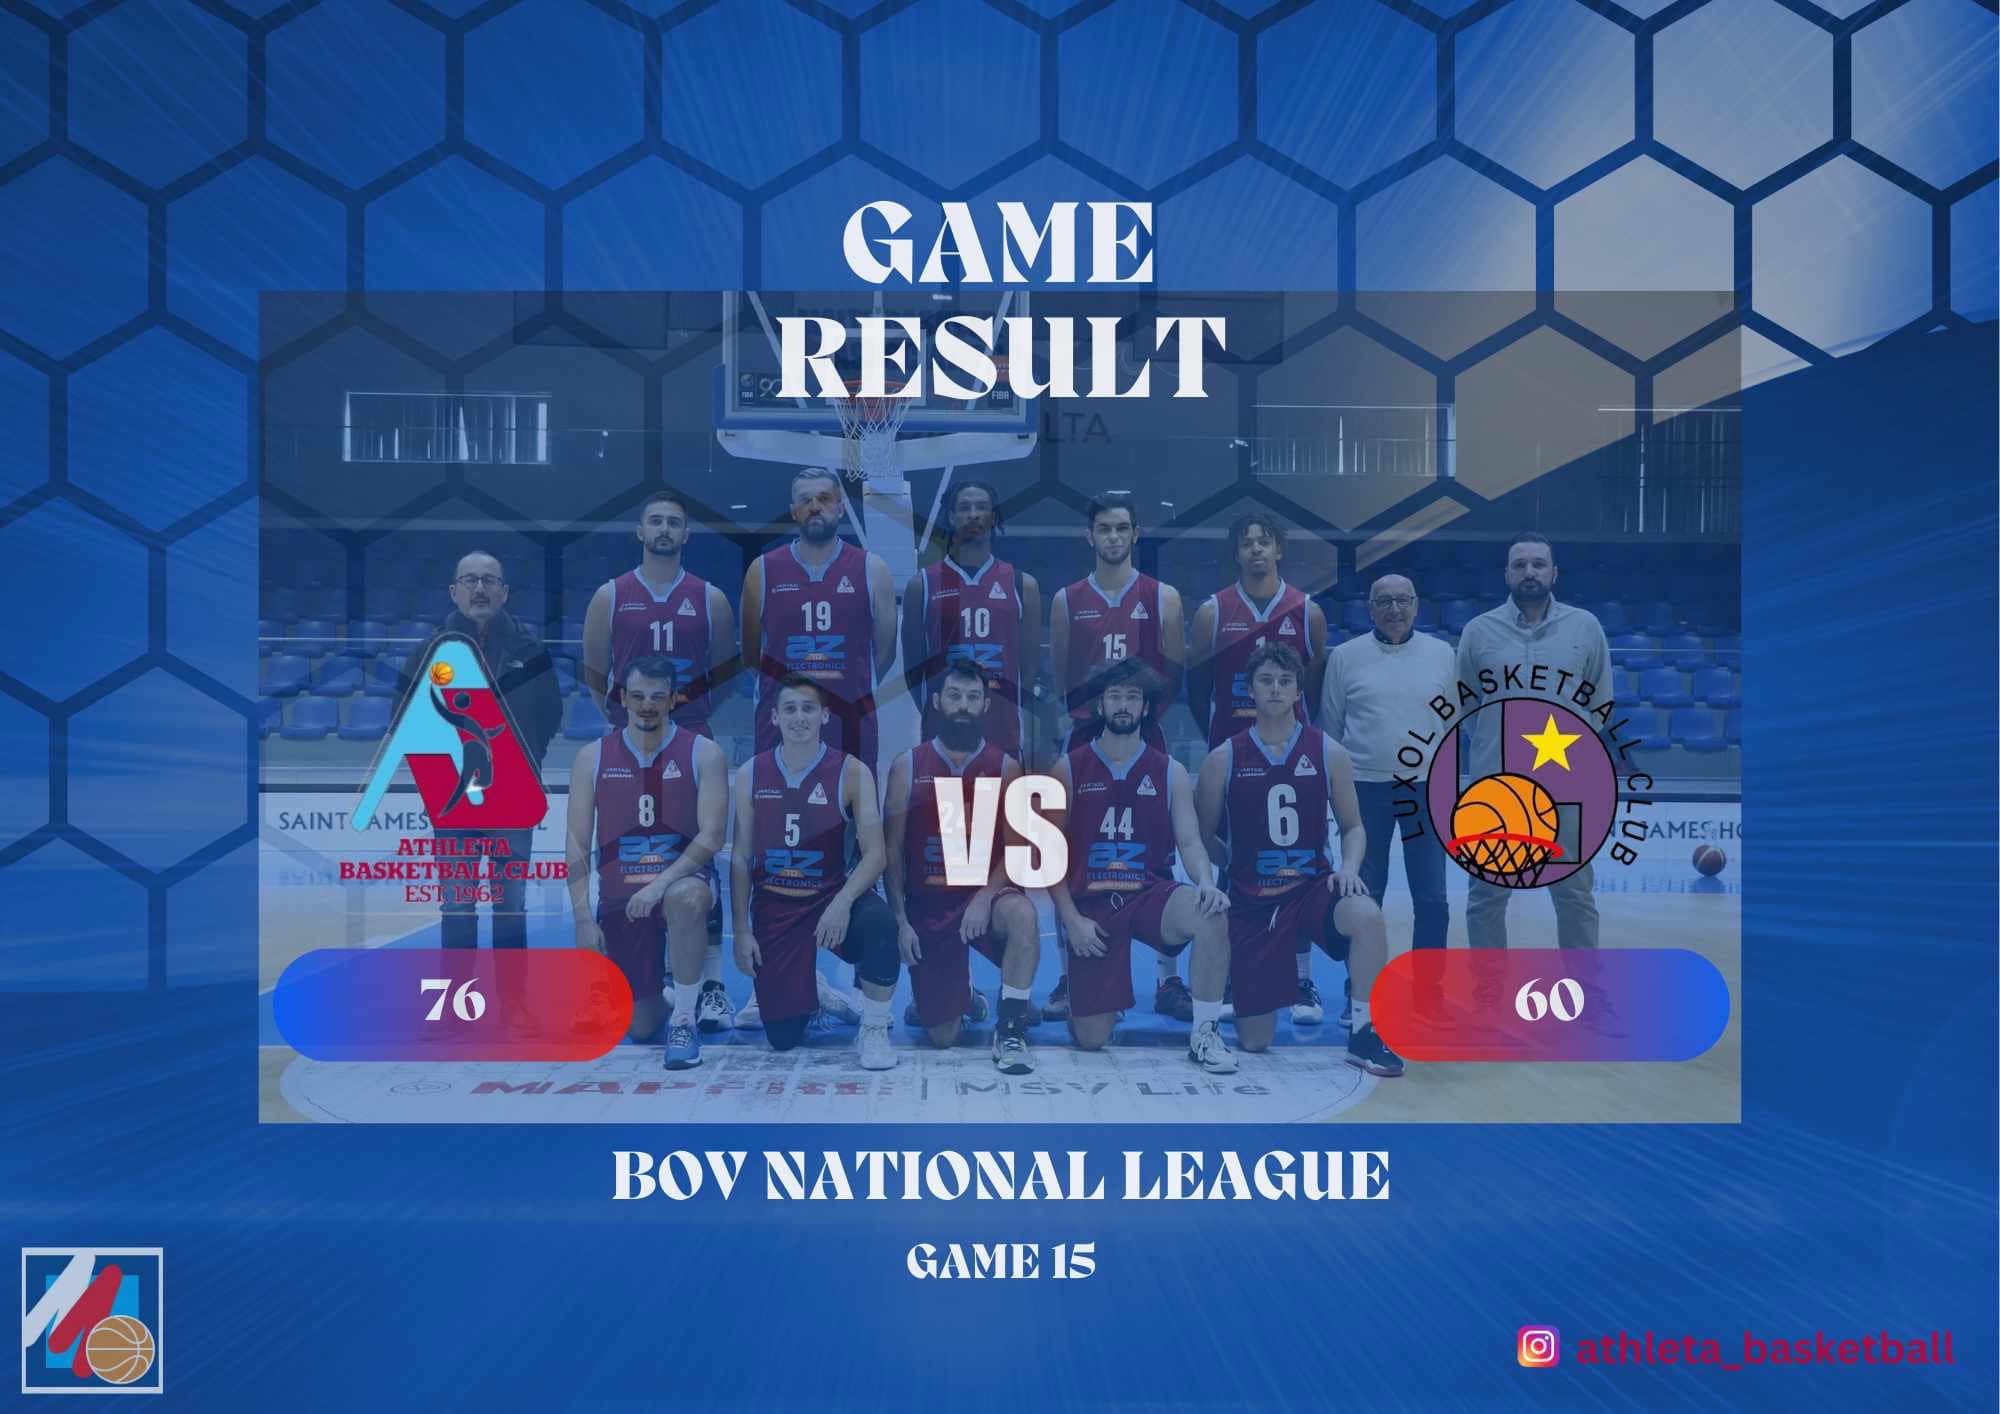 Well done to our guys for obtaining another great win, yesterday against Luxol. This win was important for our guys to book a spot in the playoffs.